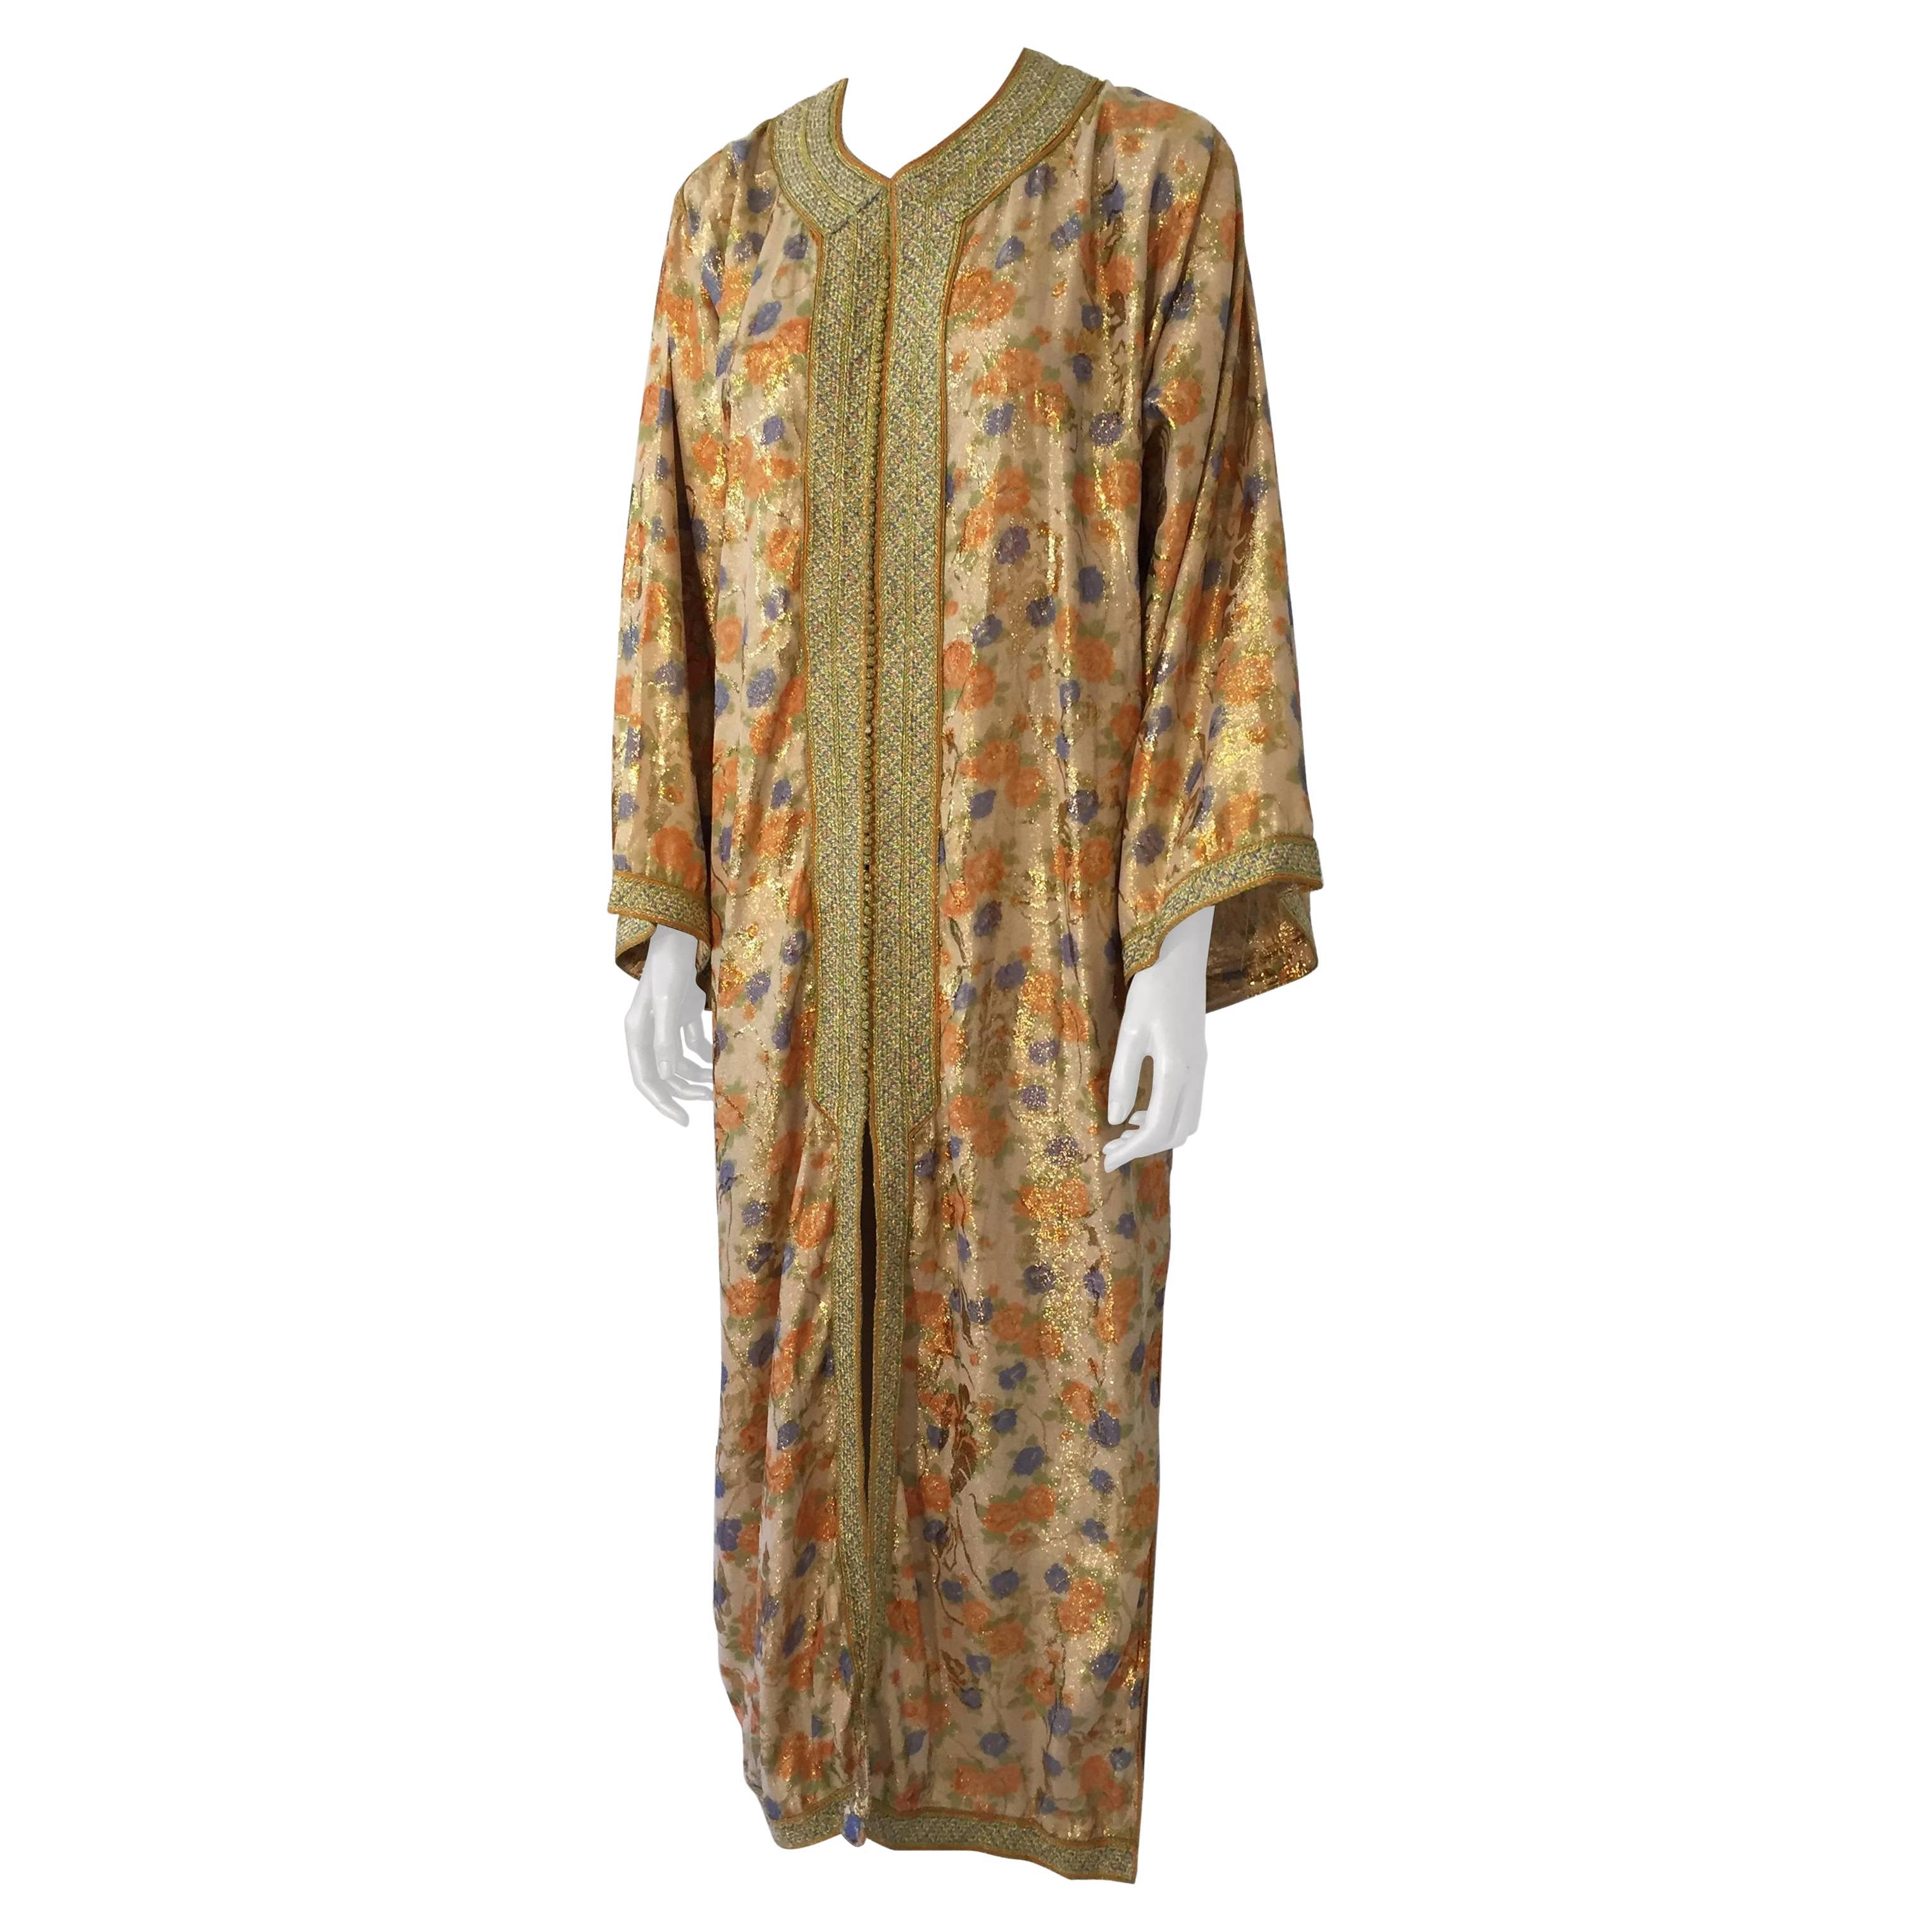 Moroccan Brocade Floral Kaftan Gown Maxi Dress For Sale